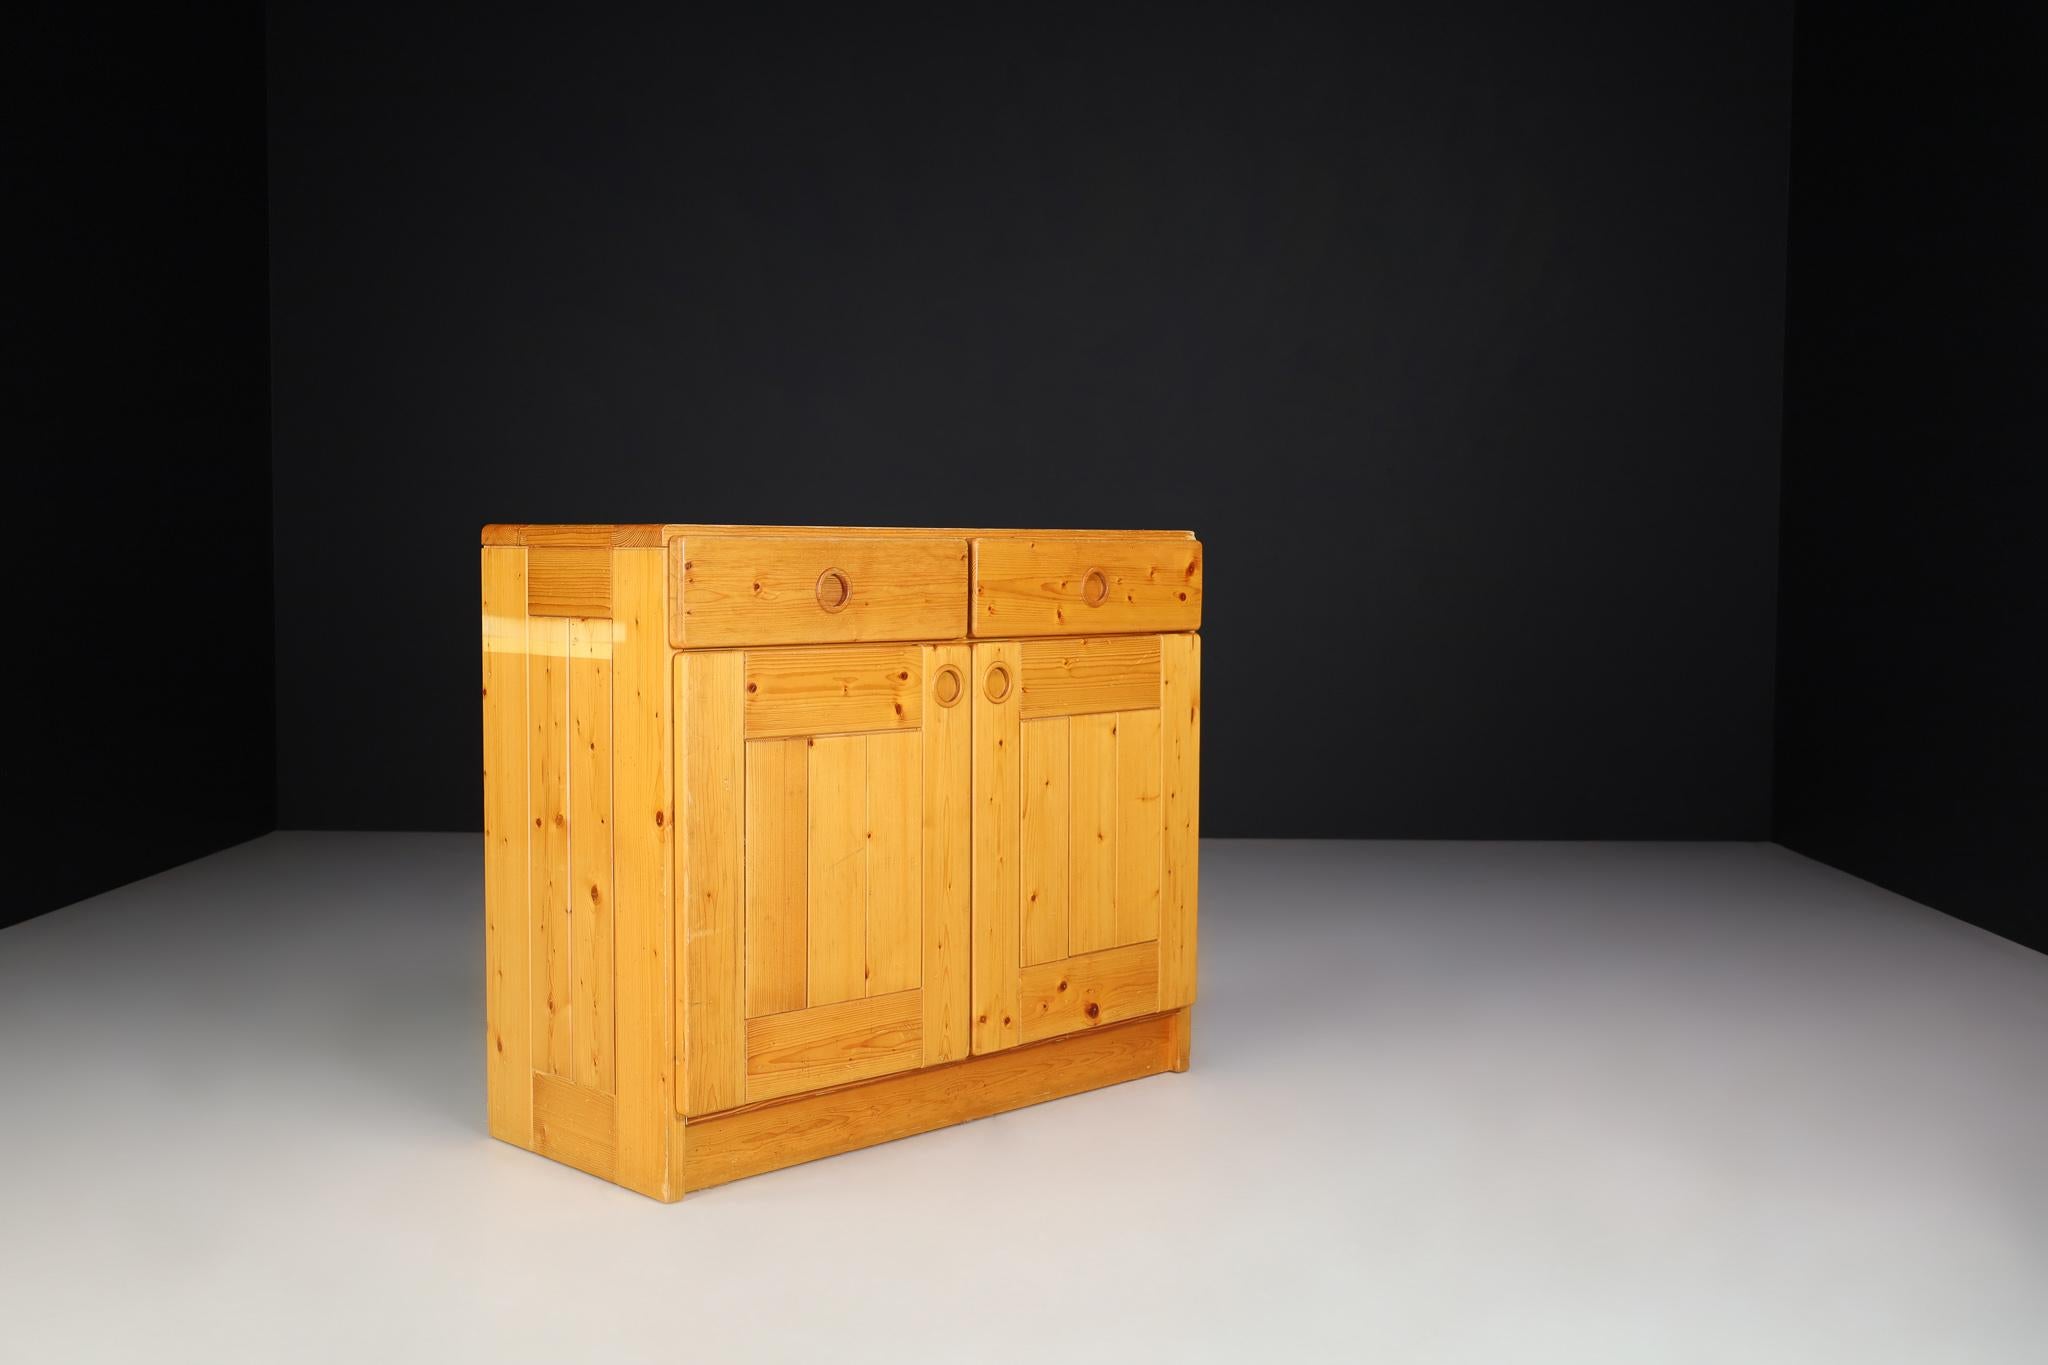 French Mid-Century Modern Pine Cabinet/Cupboard By Charlotte Perriand for Les Arcs 1970 For Sale